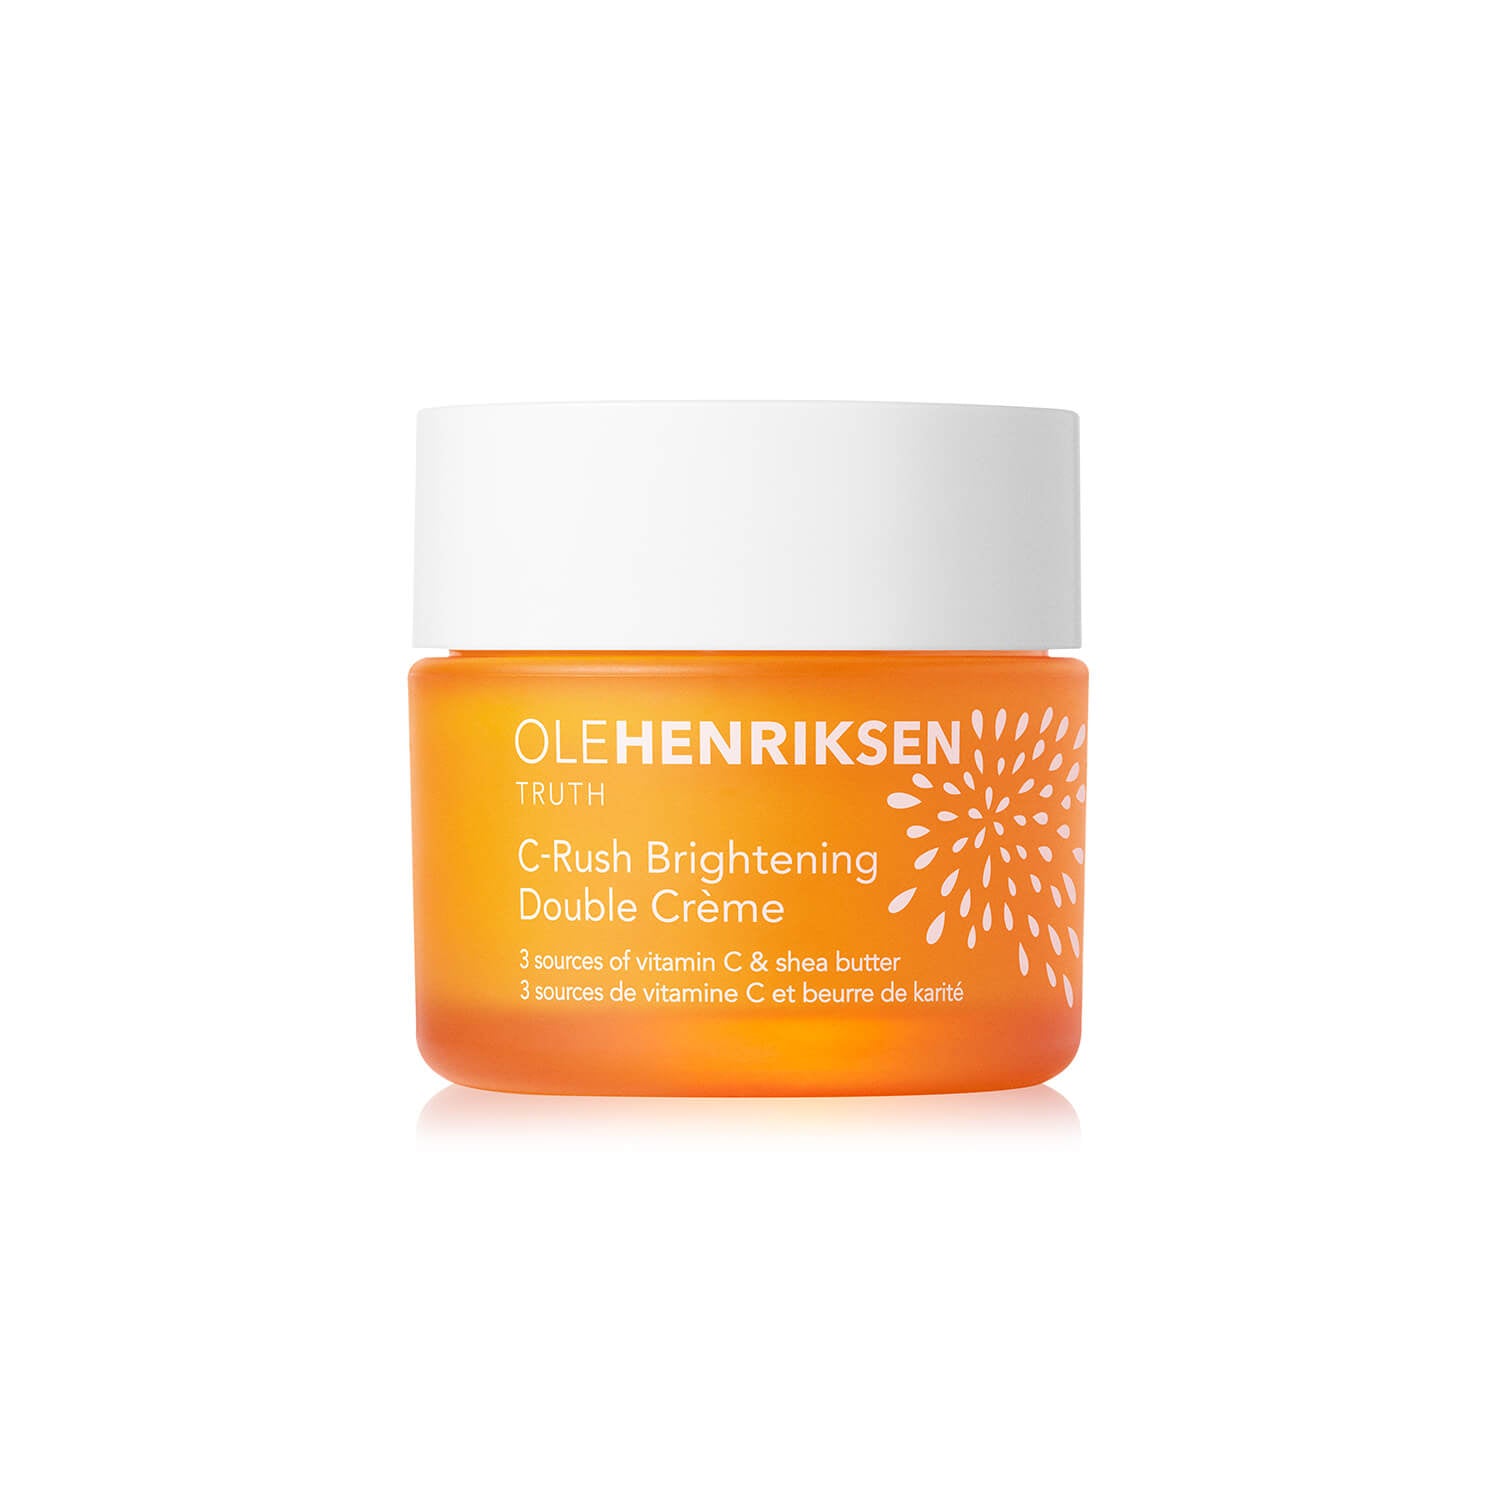 My Top 5 Ole Henriksen Products – Style As Needed